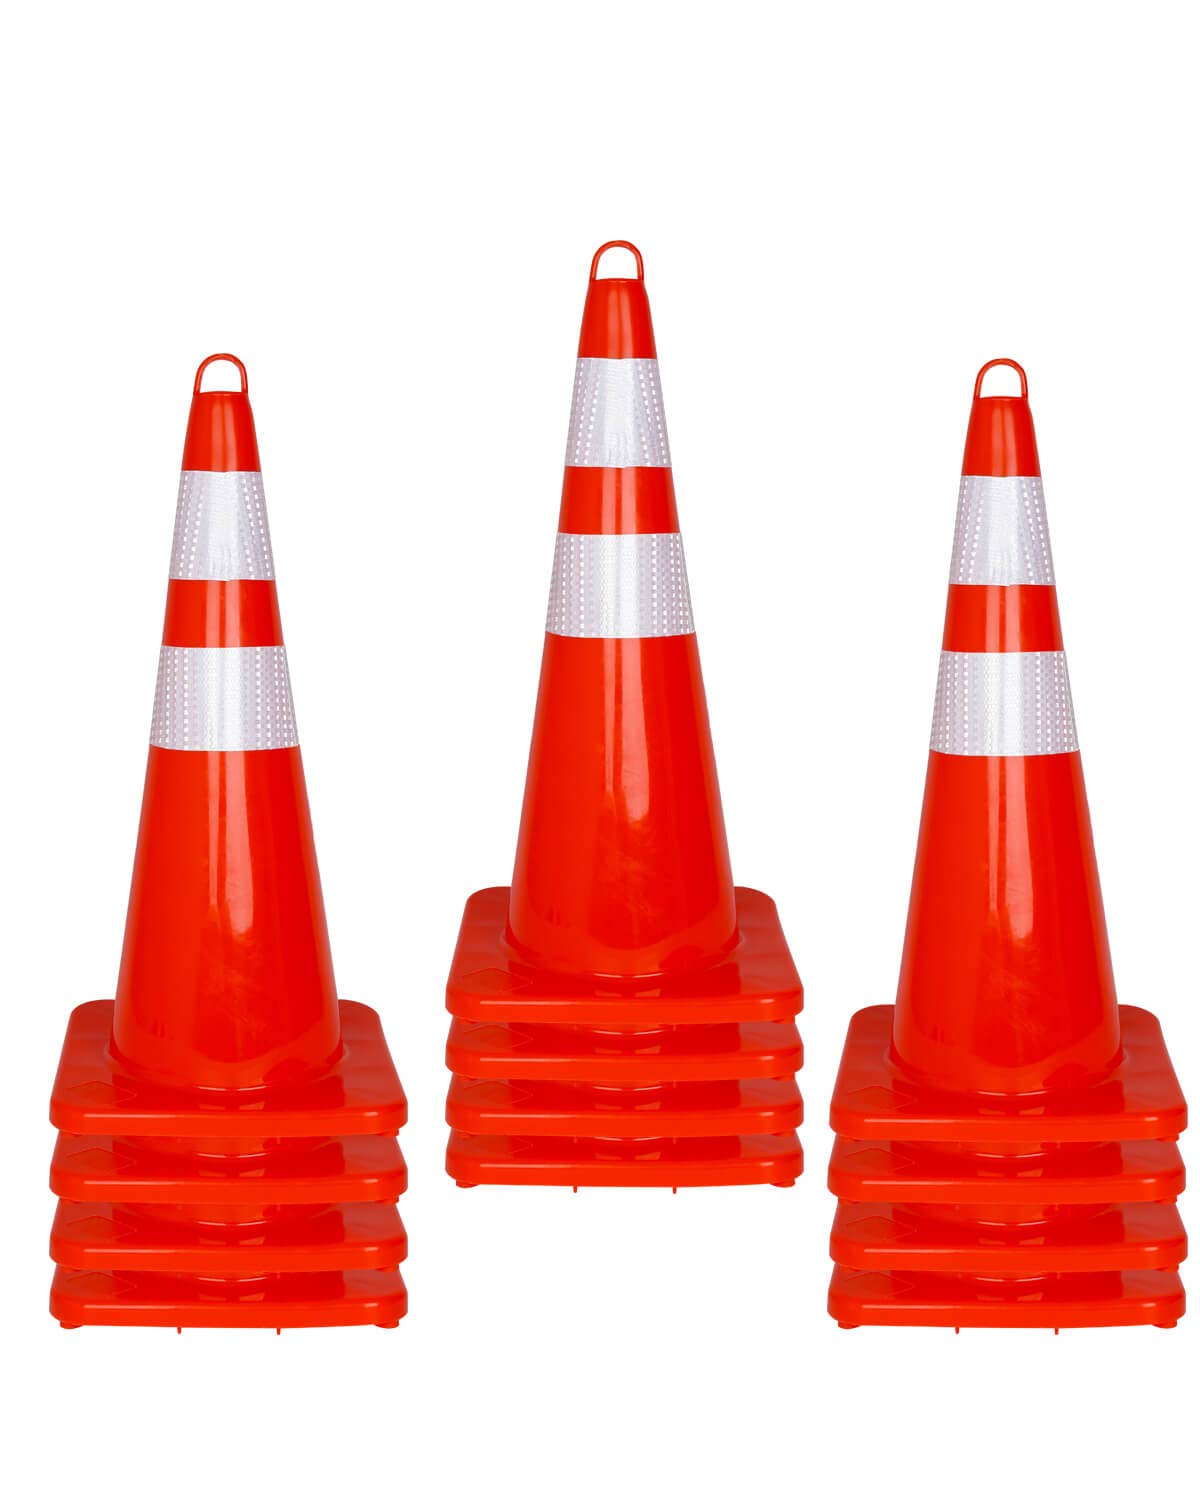 12 Pcs Traffic Safety Road Cones - 28 Inch Orange Traffic Parking Cons ...